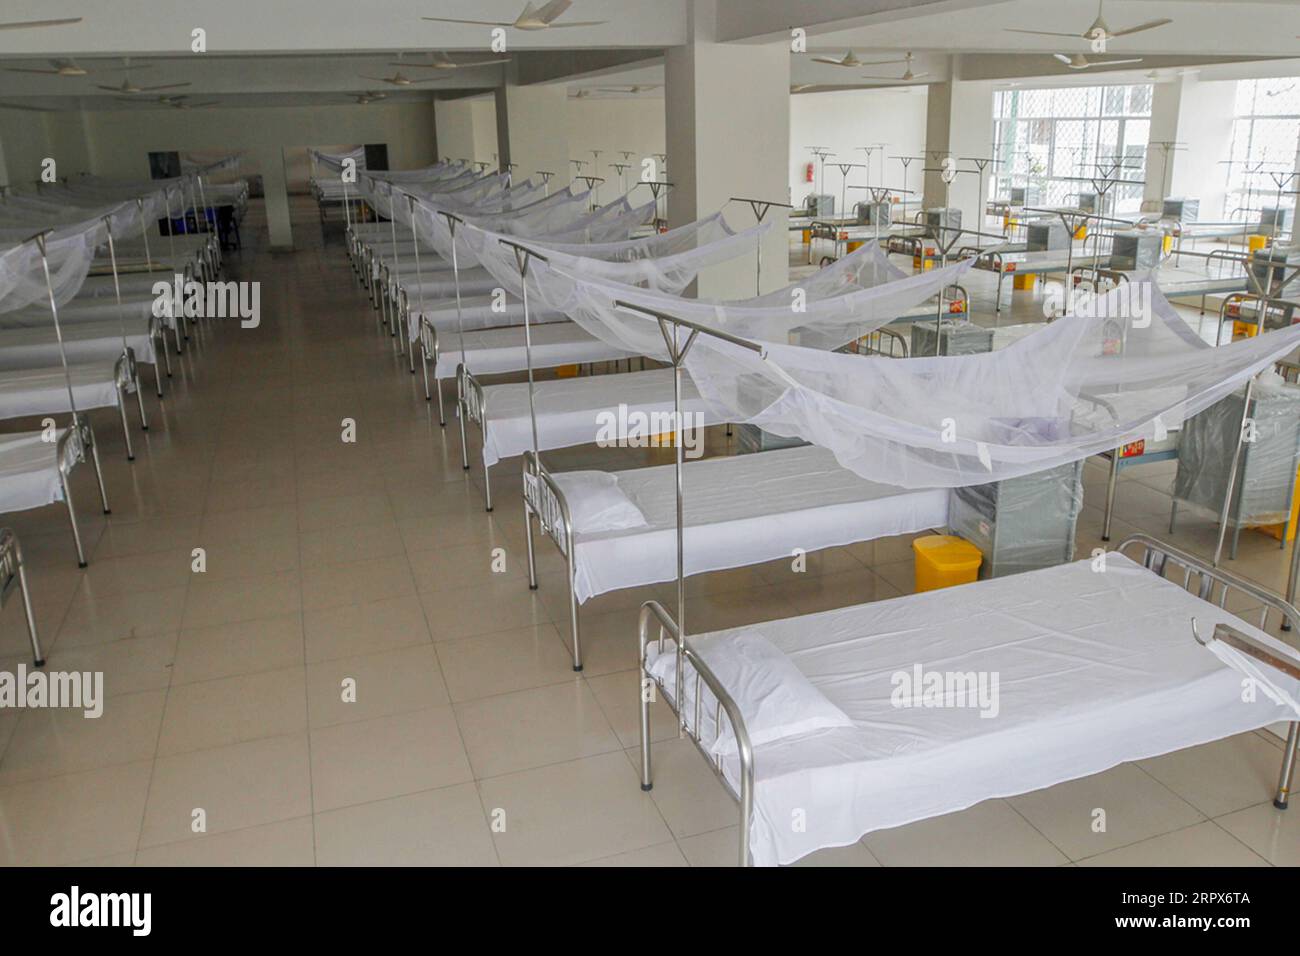 200510 -- DHAKA, May 10, 2020 Xinhua -- Photo shows beds inside a quarantine facility in Dhaka, Bangladesh on May 10, 2020. The number of new COVID-19 infections in Bangladesh rose by 887 on Sunday, the highest daily increase since March 8. Str/Xinhua BANGLADESH-DHAKA-MAKESHIFT-QUARANTINE-FACILITIES PUBLICATIONxNOTxINxCHN Stock Photo